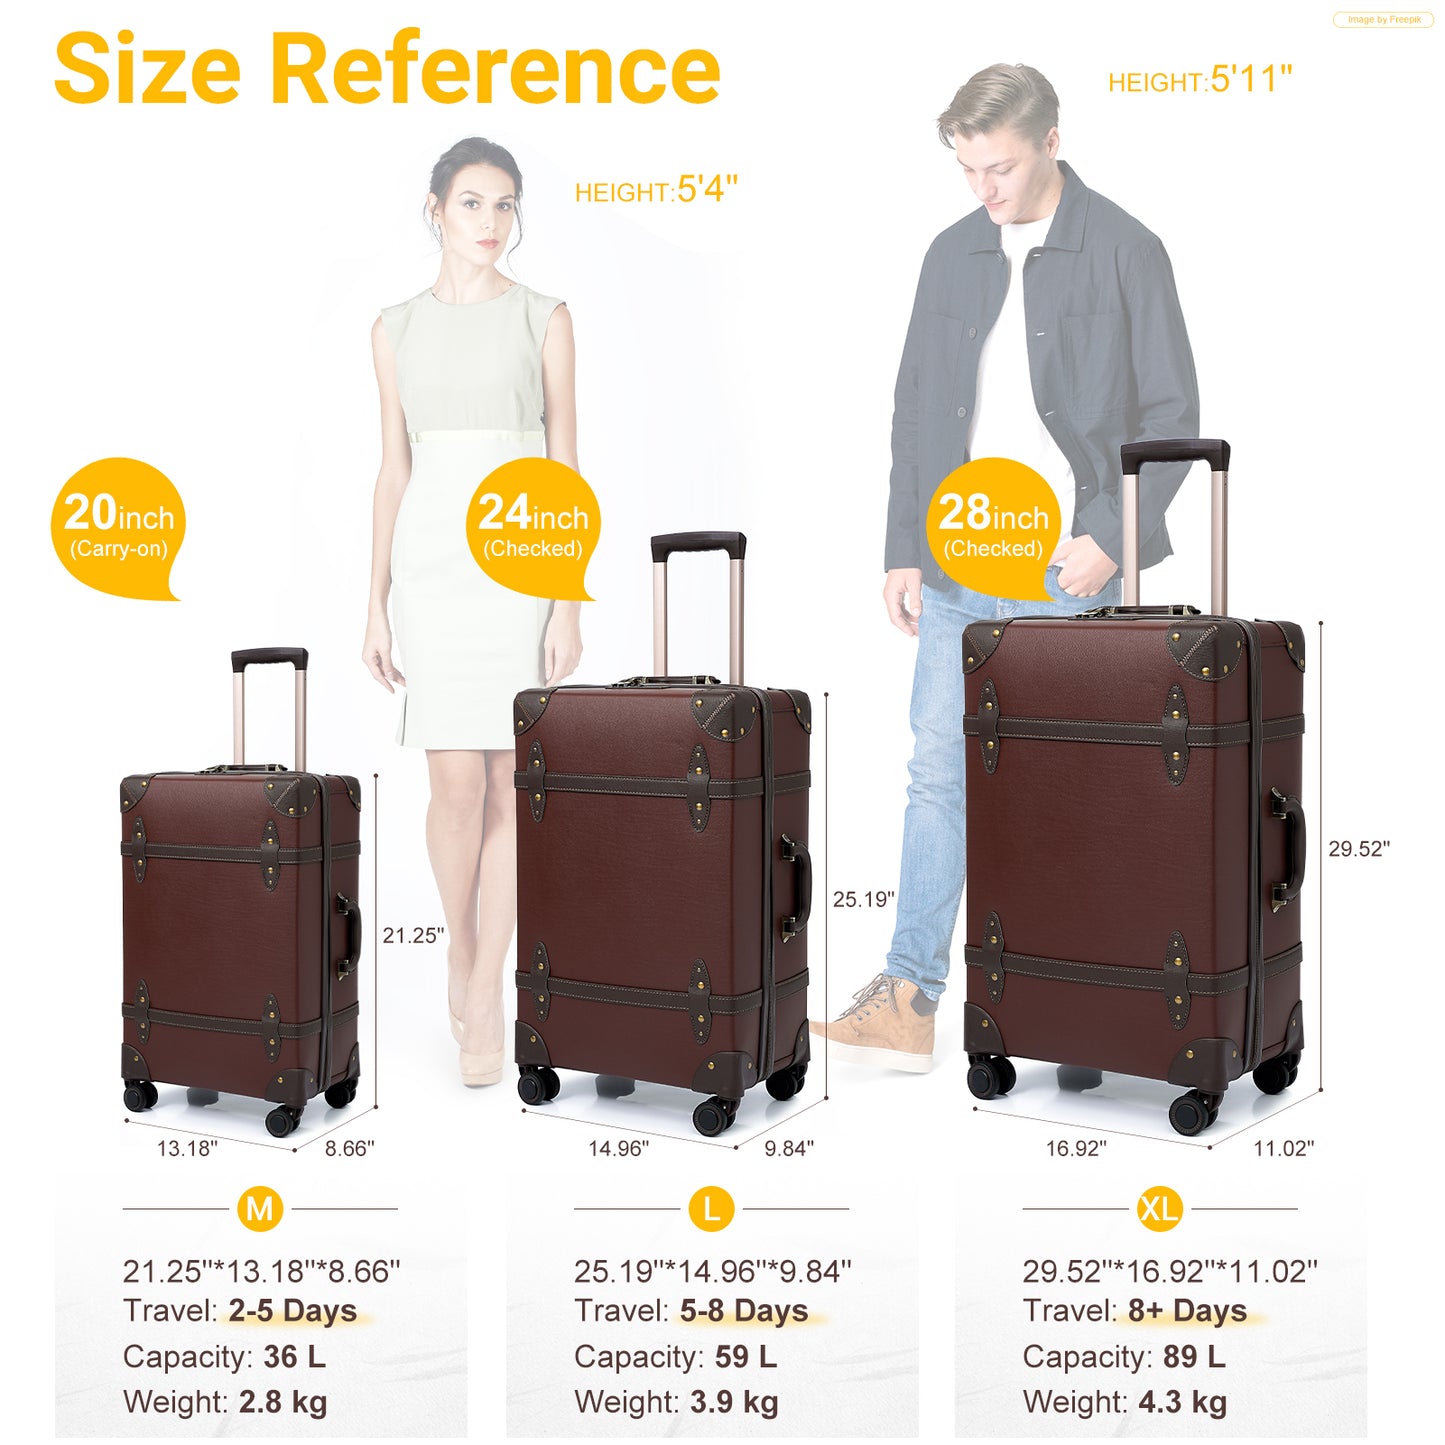 NZBZ Vintage Luggage Sets for Women Retro Suitcase Vintage Trunk Luggage 3 Pieces with TSA Lock 20inch & 24inch & 28inch